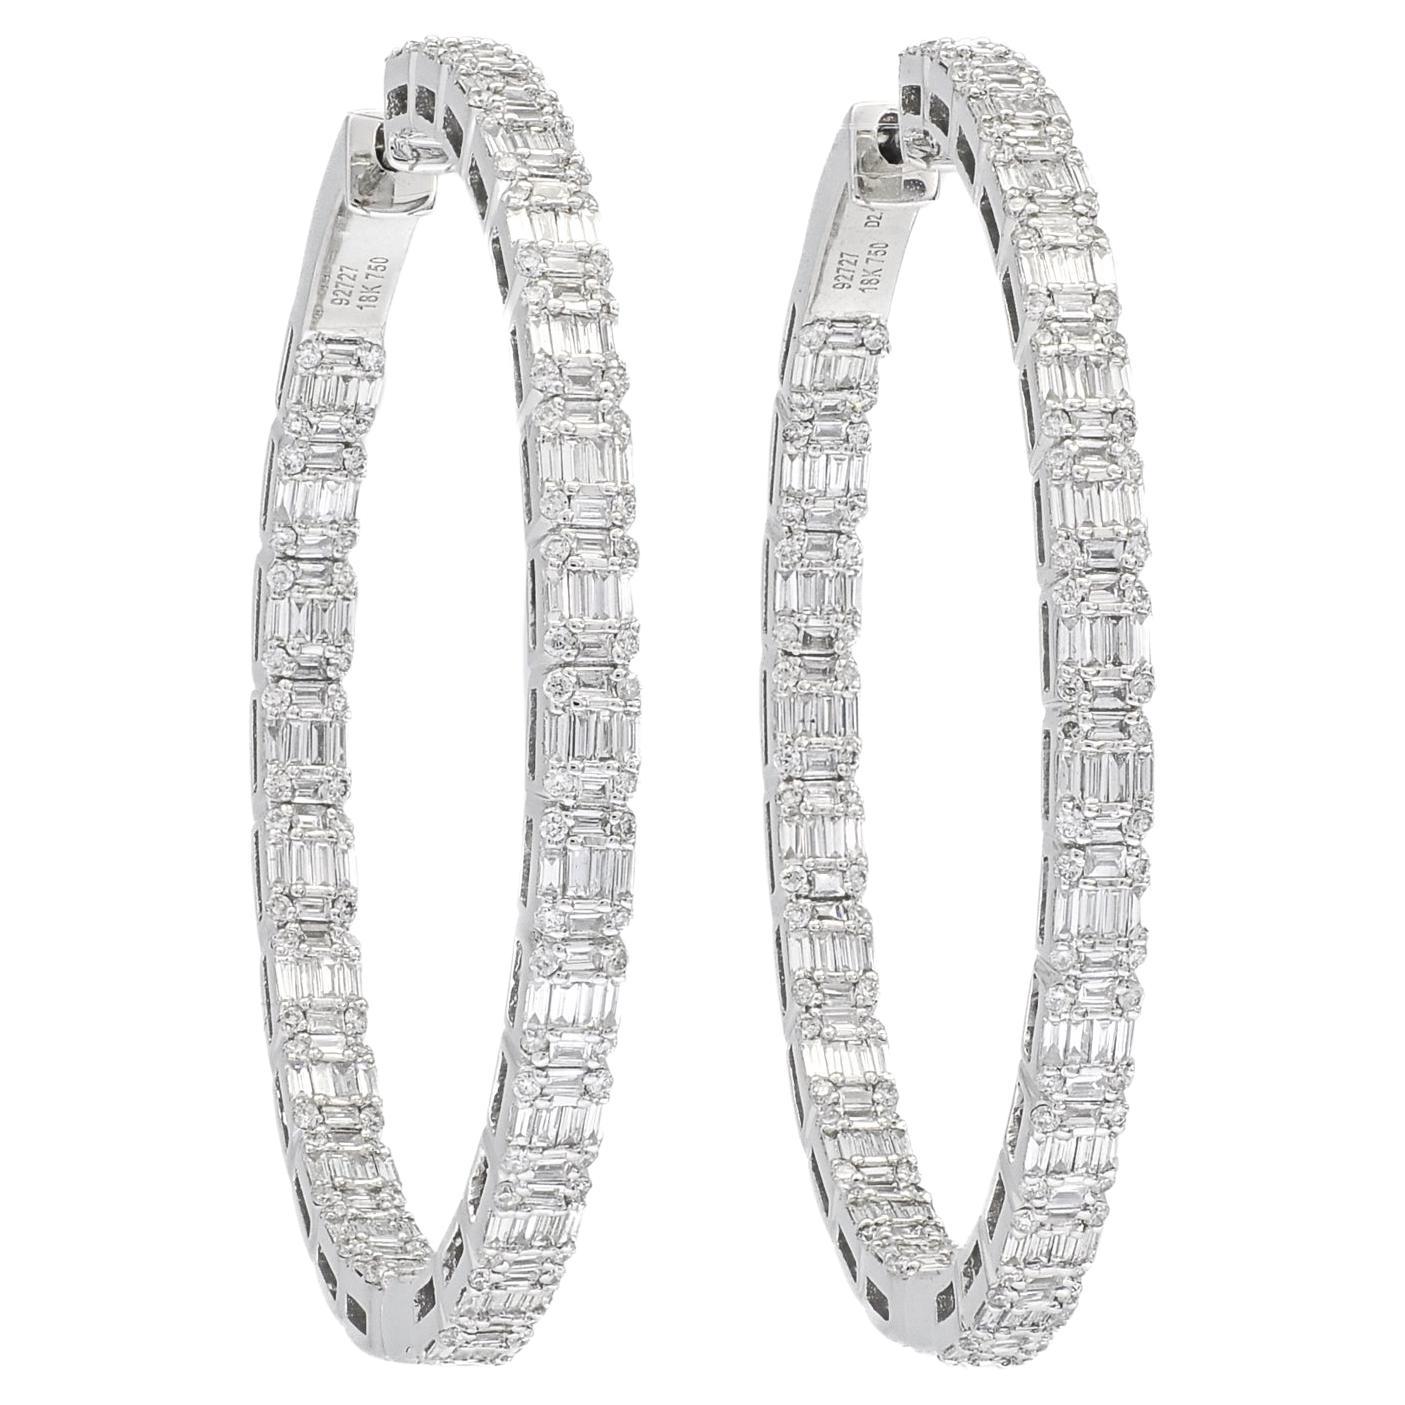  Natural Dimond 2.13 Carats 18KT White Gold 'in and Out' Hoop Earring E20248